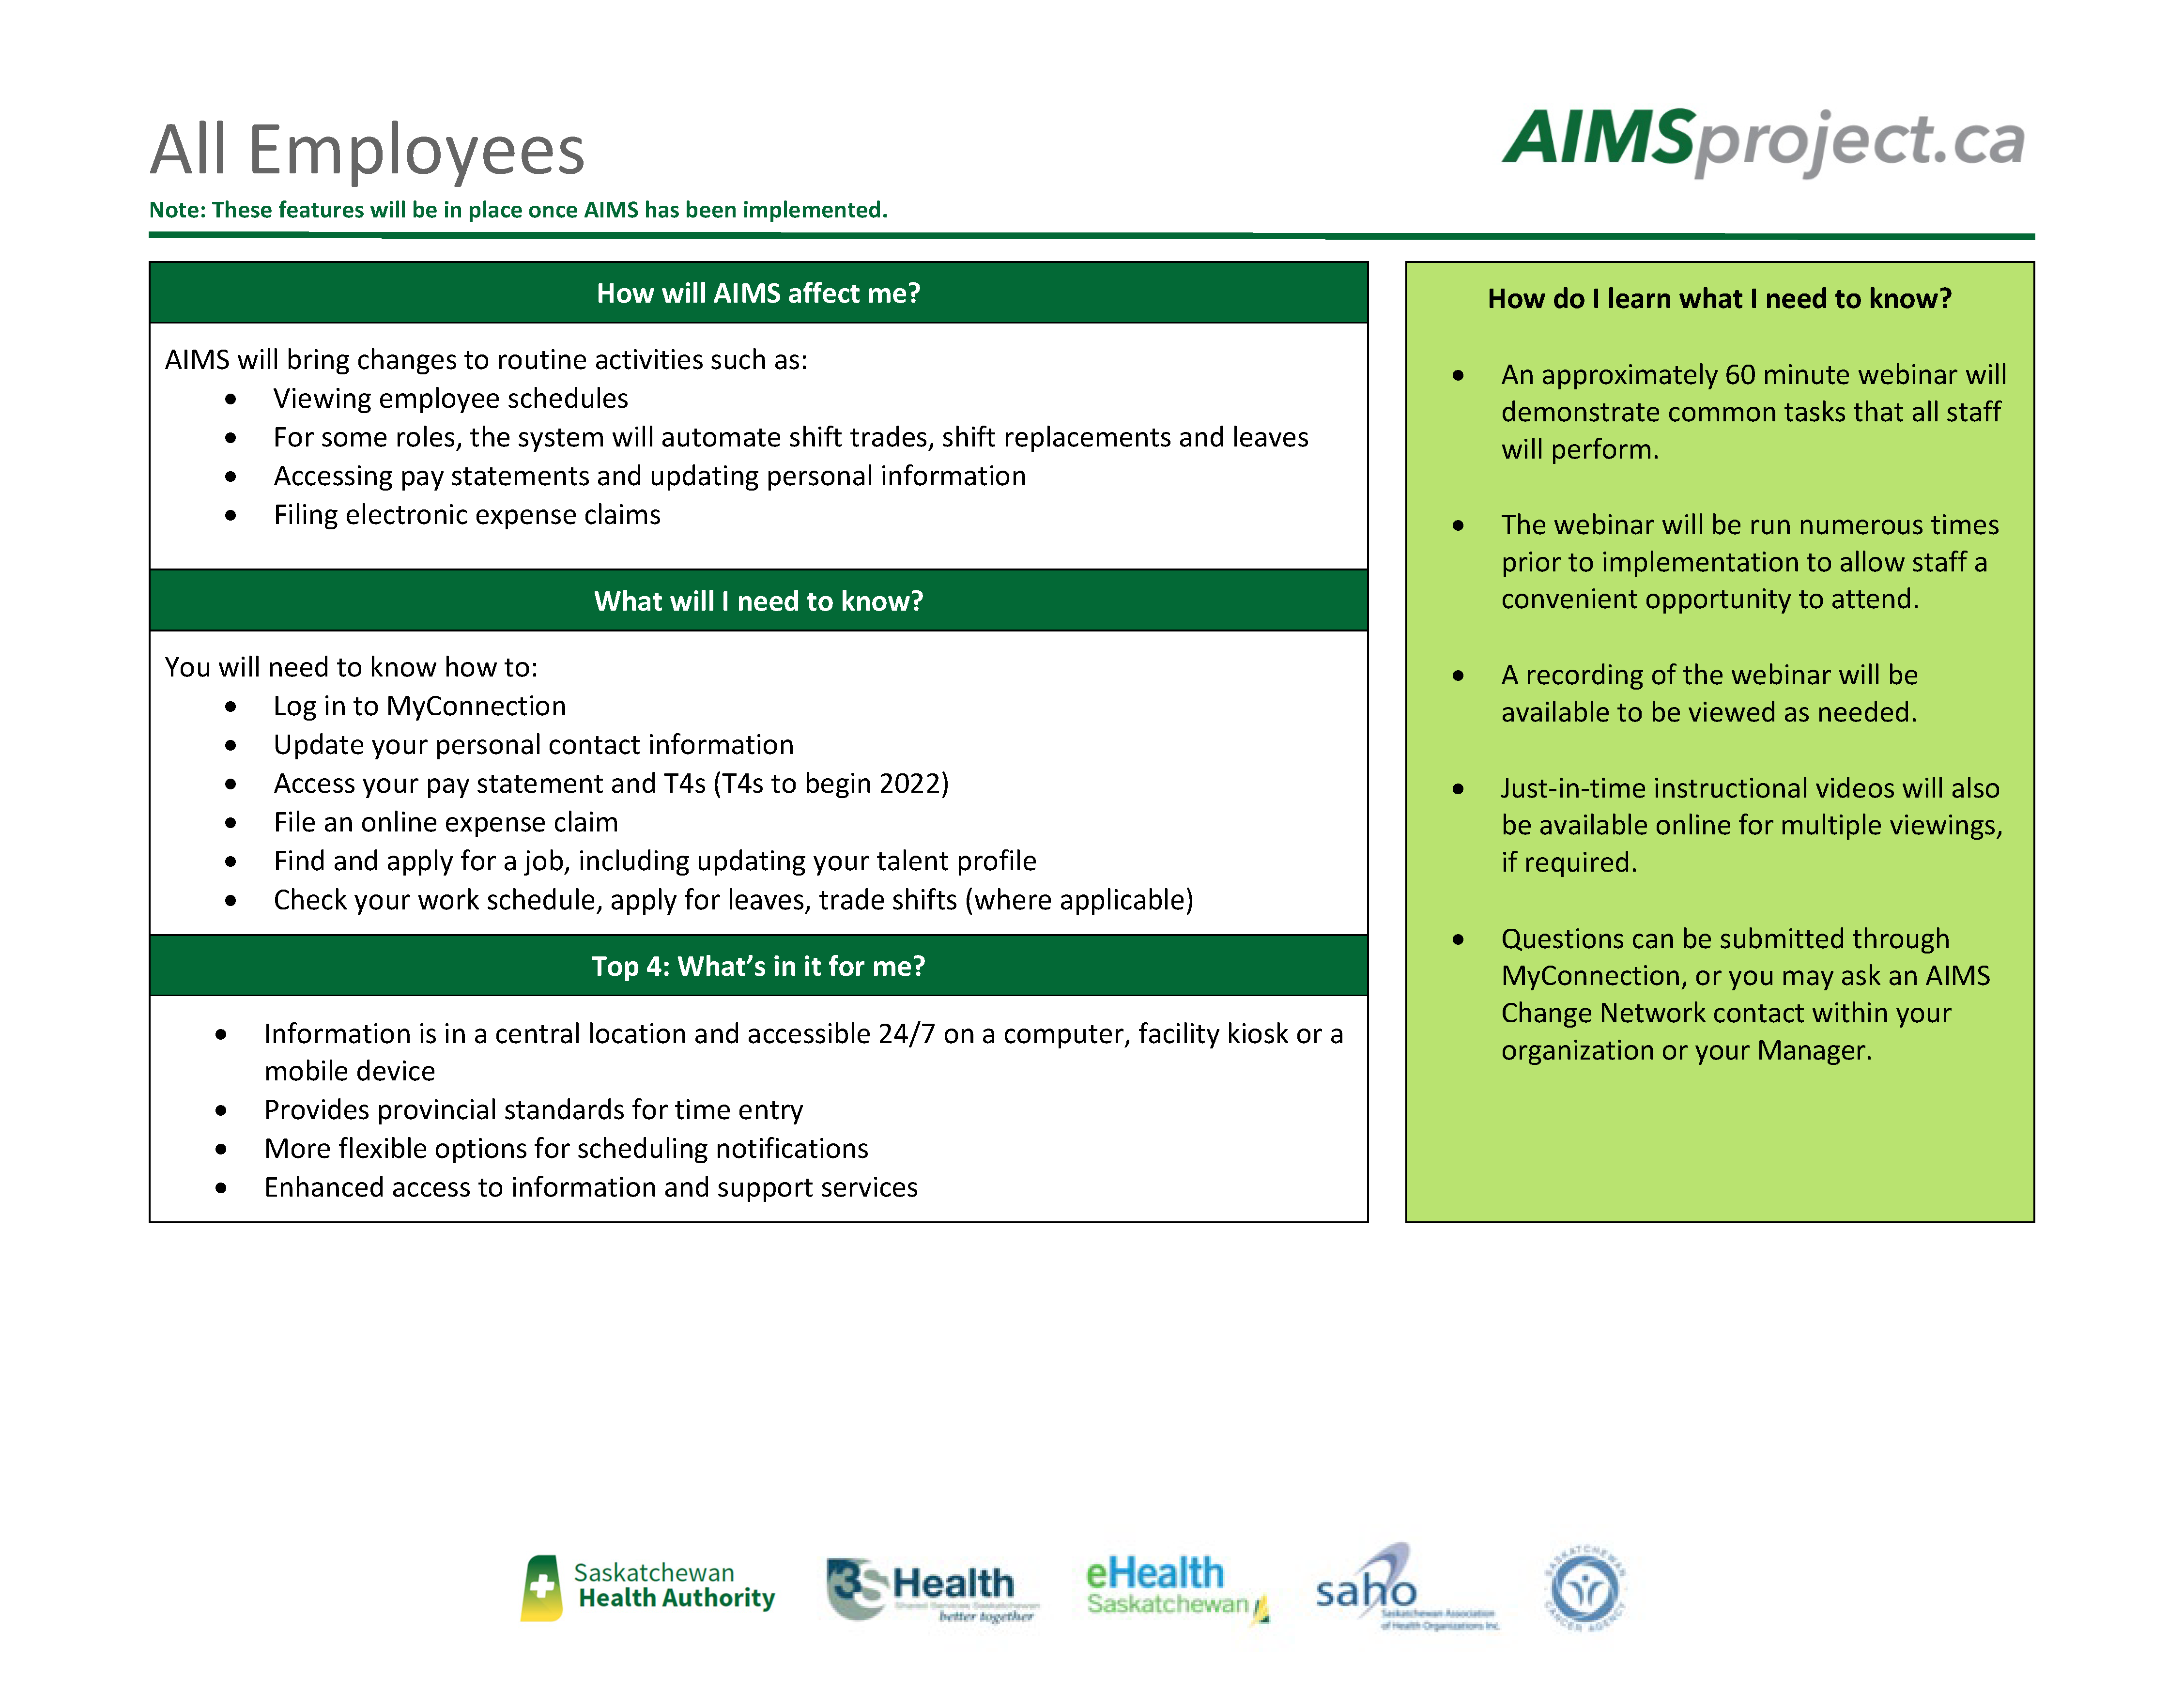 AIMS Learning - All Employees